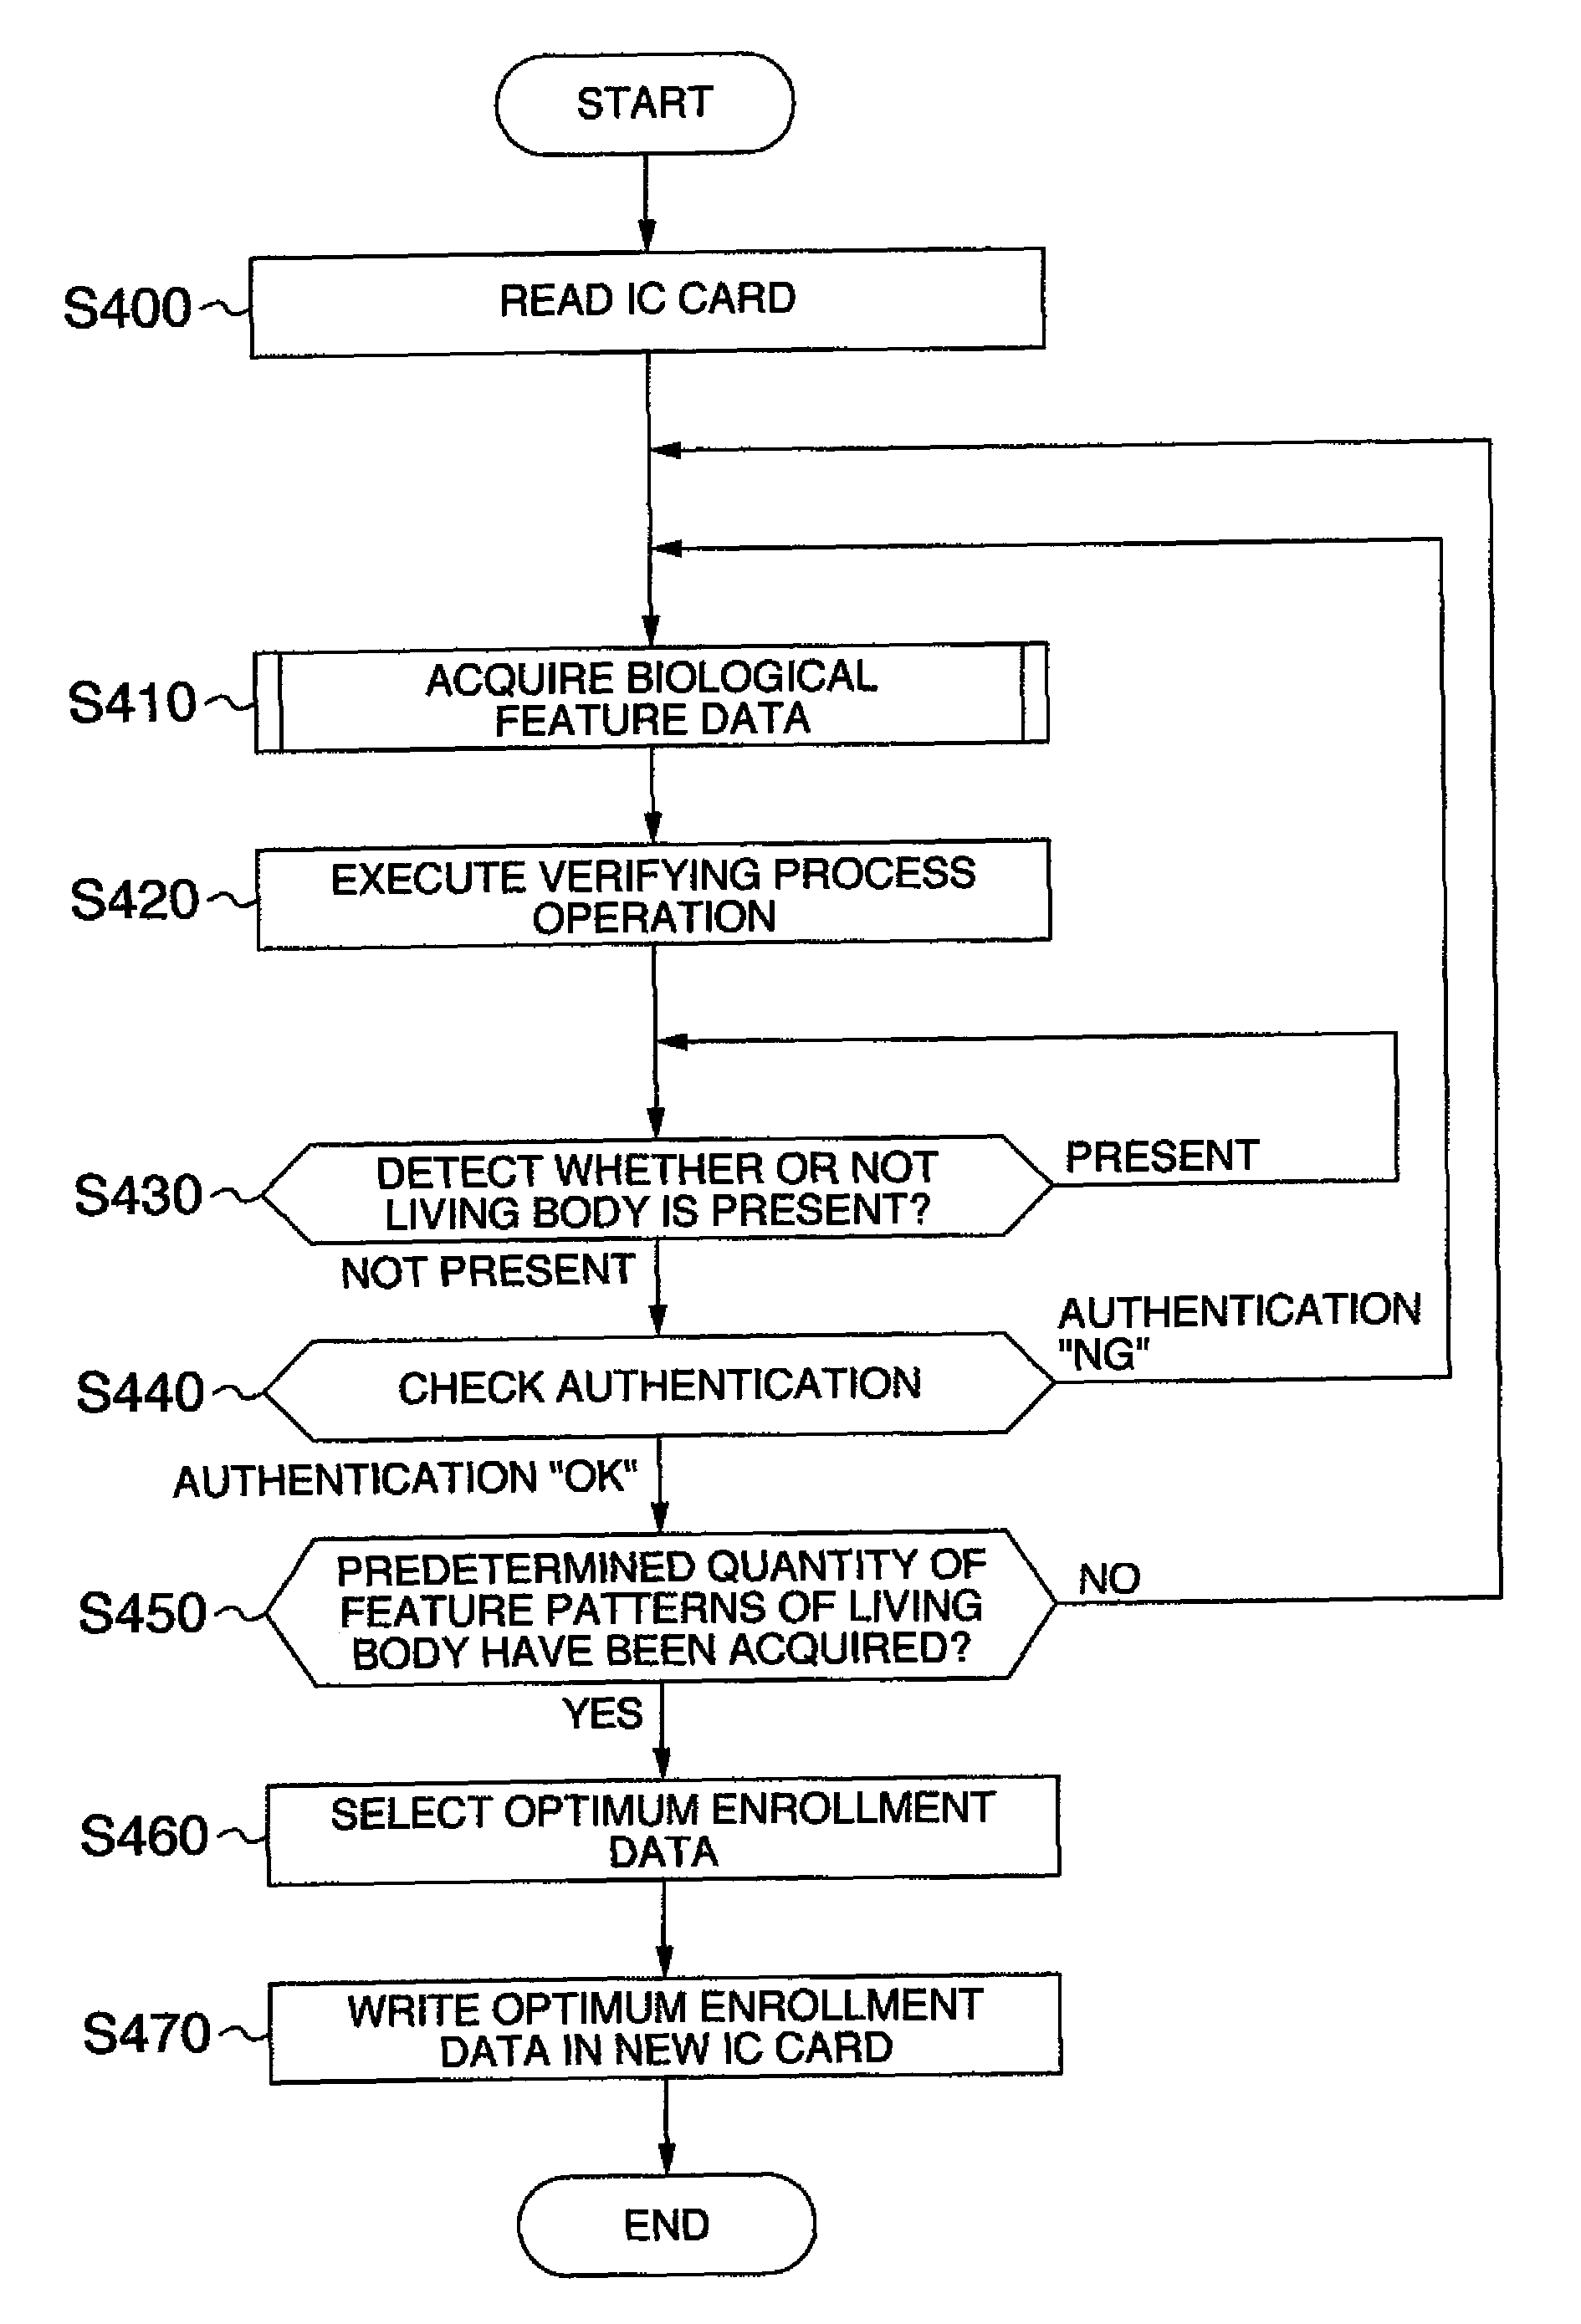 Card processing apparatus and card processing method